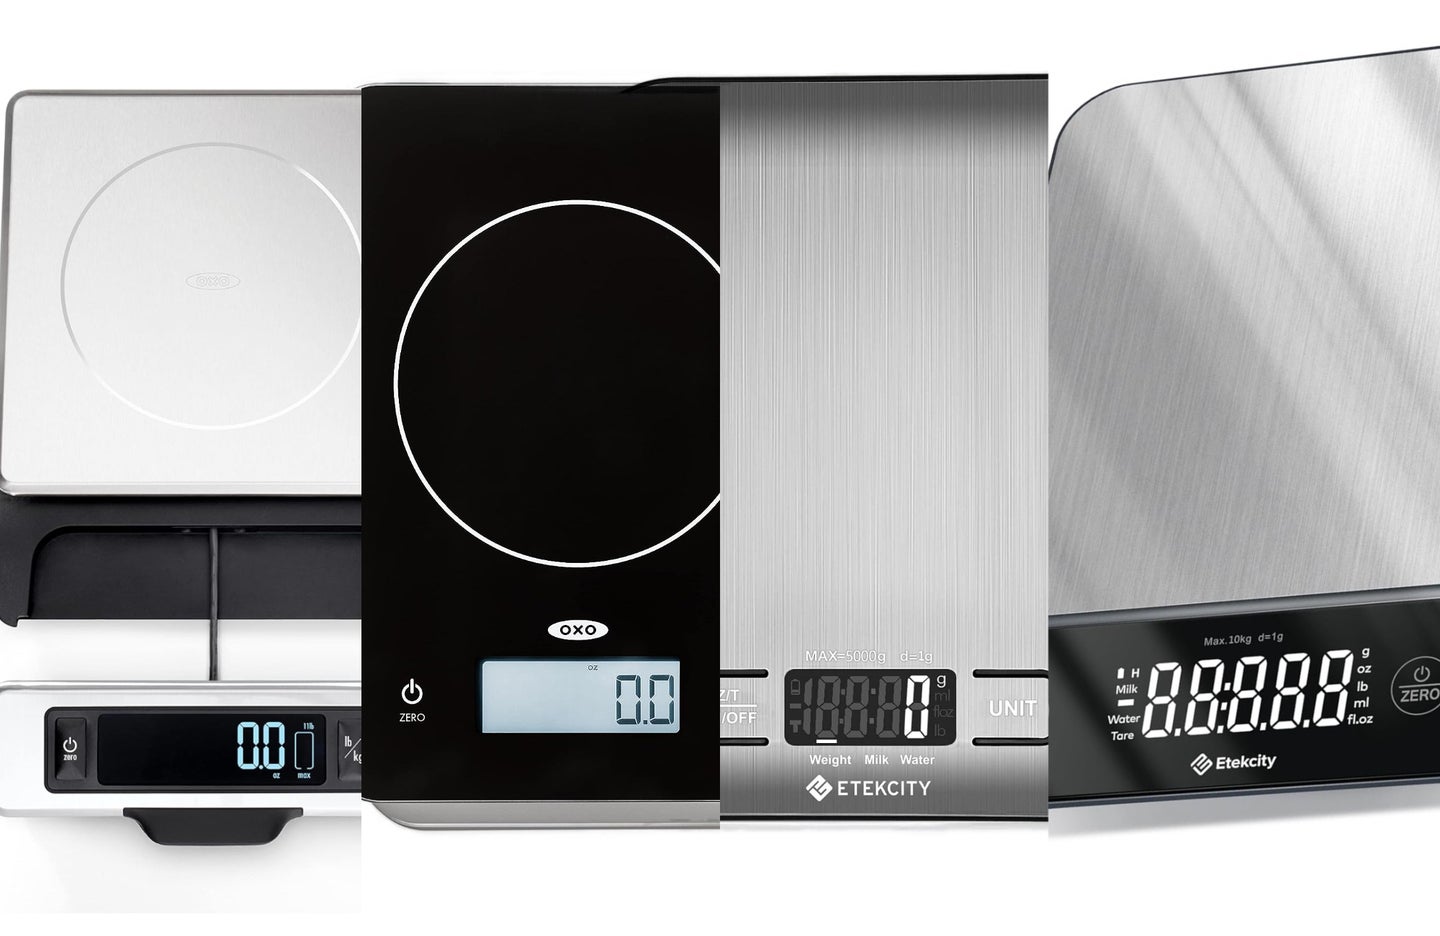 The best kitchen scales on a plain white background.